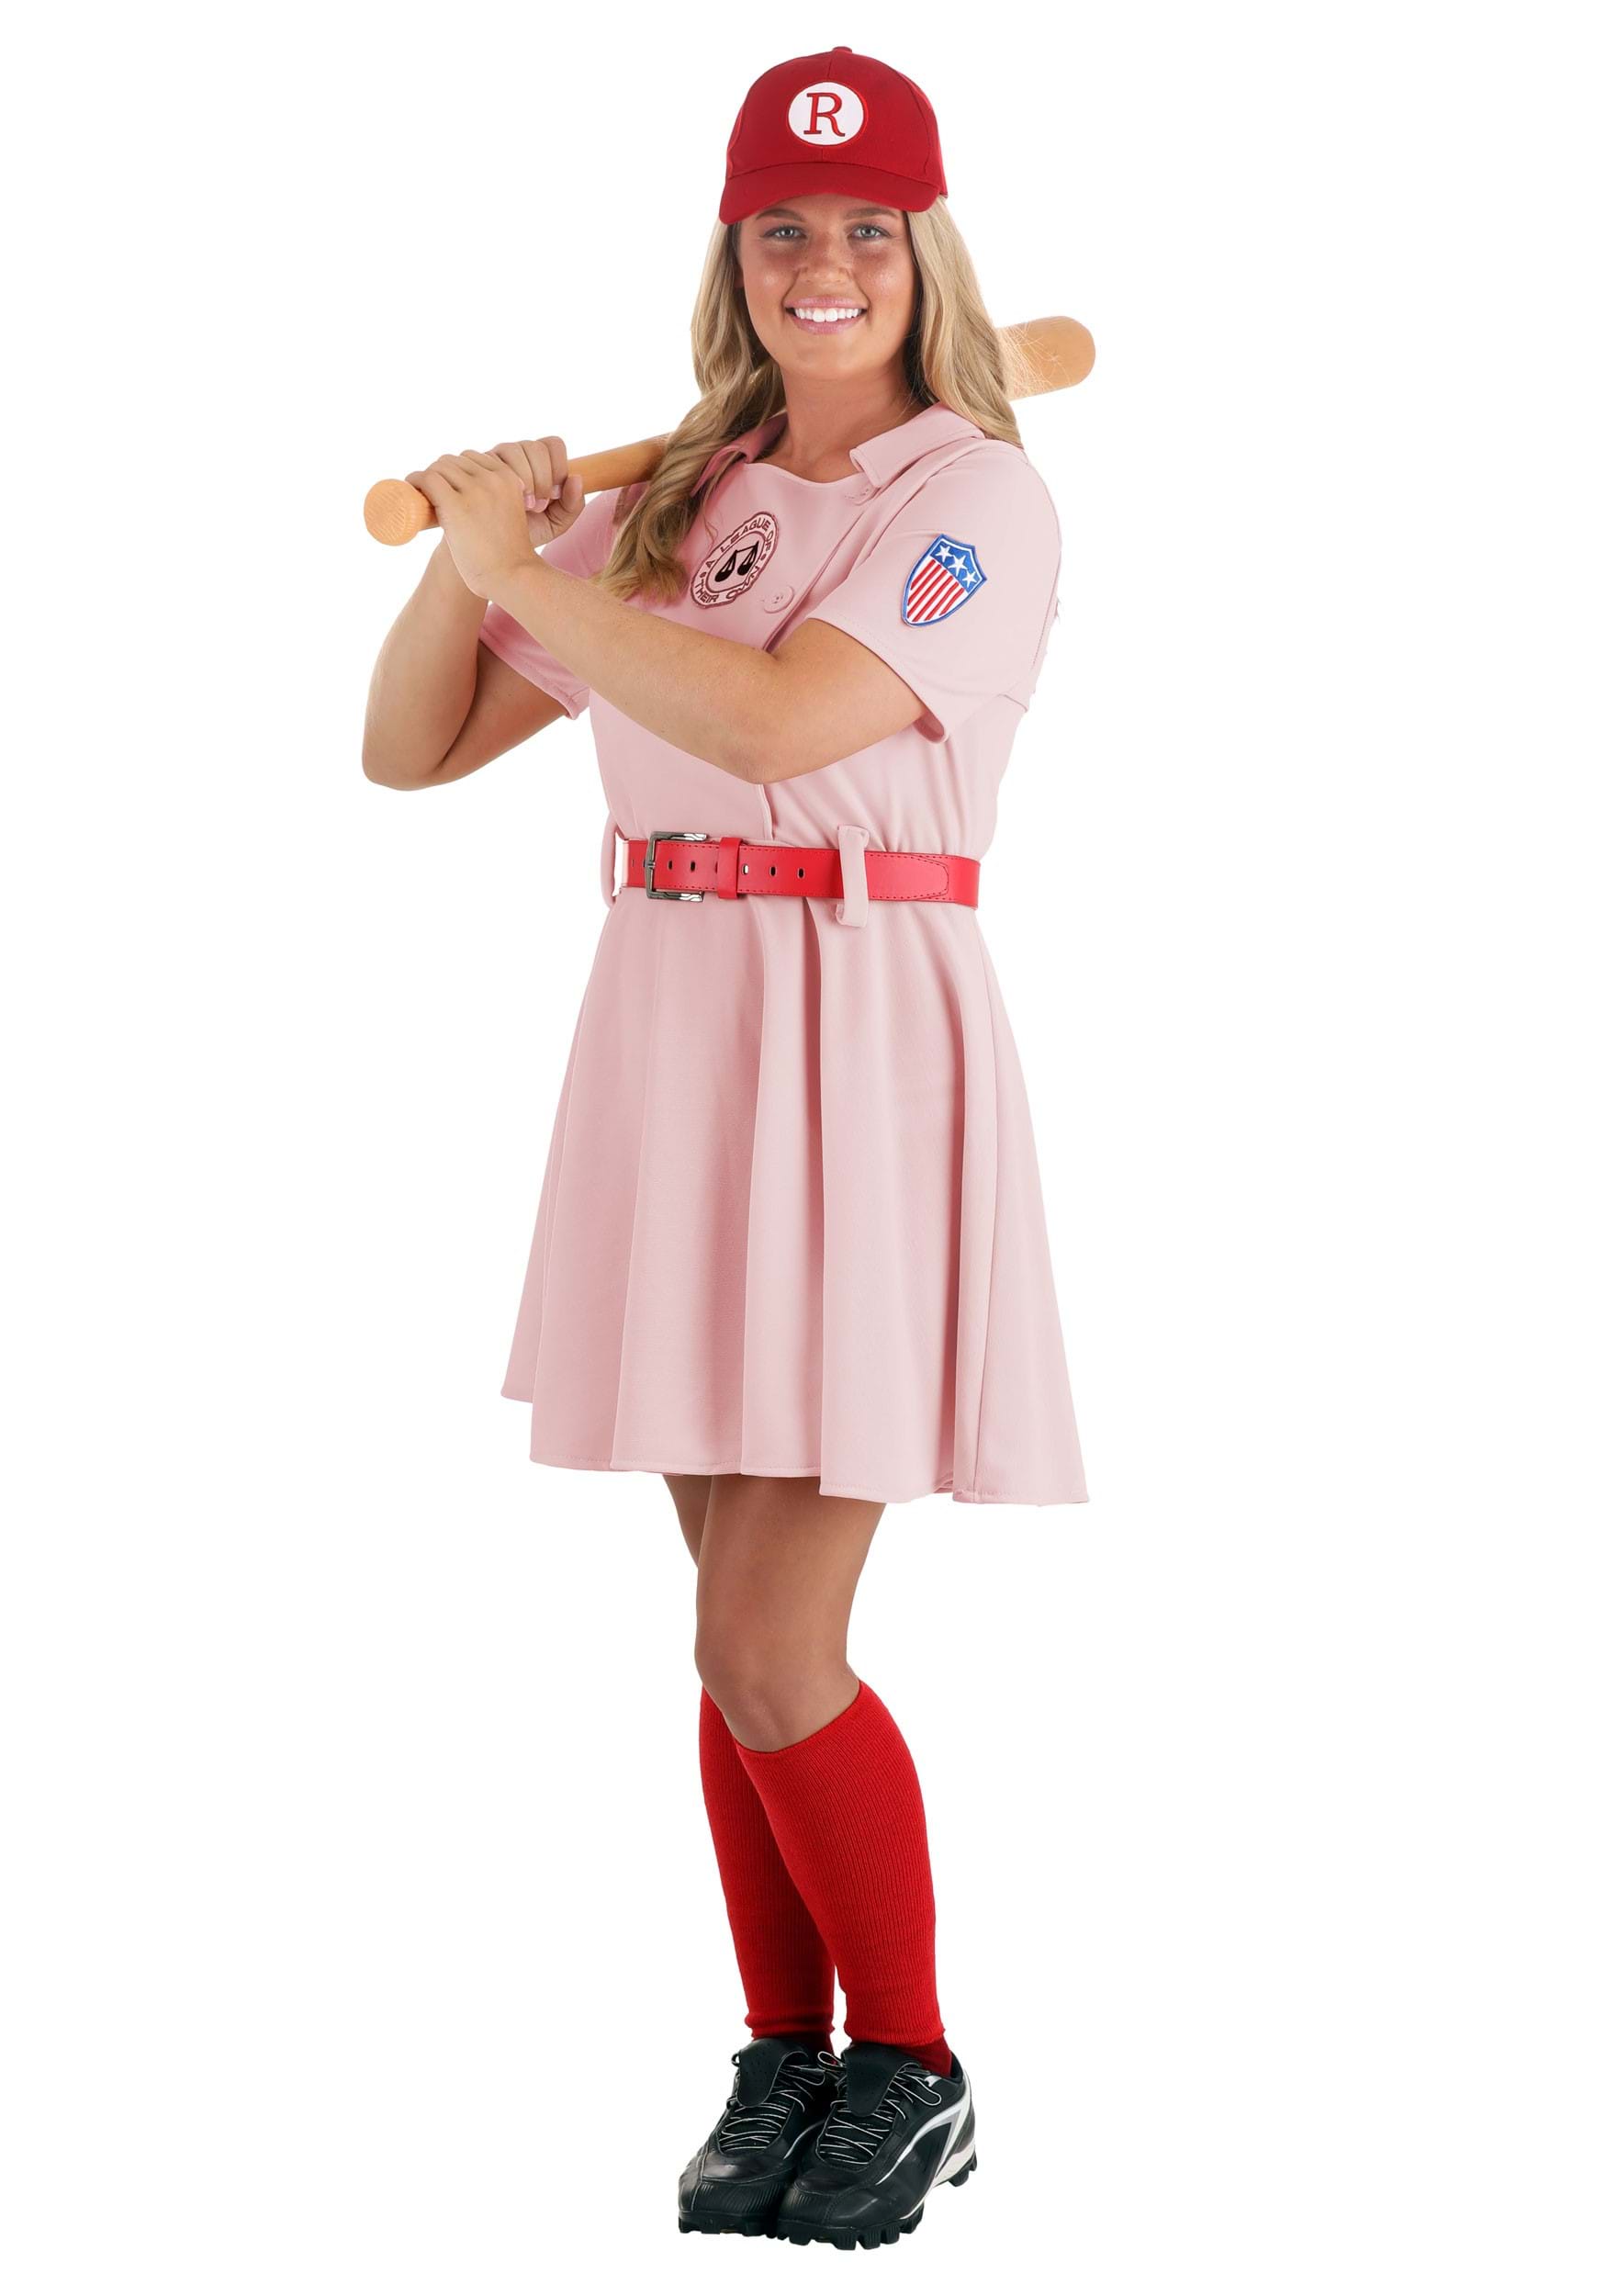 Girls Dottie Costume from A League of Their Own